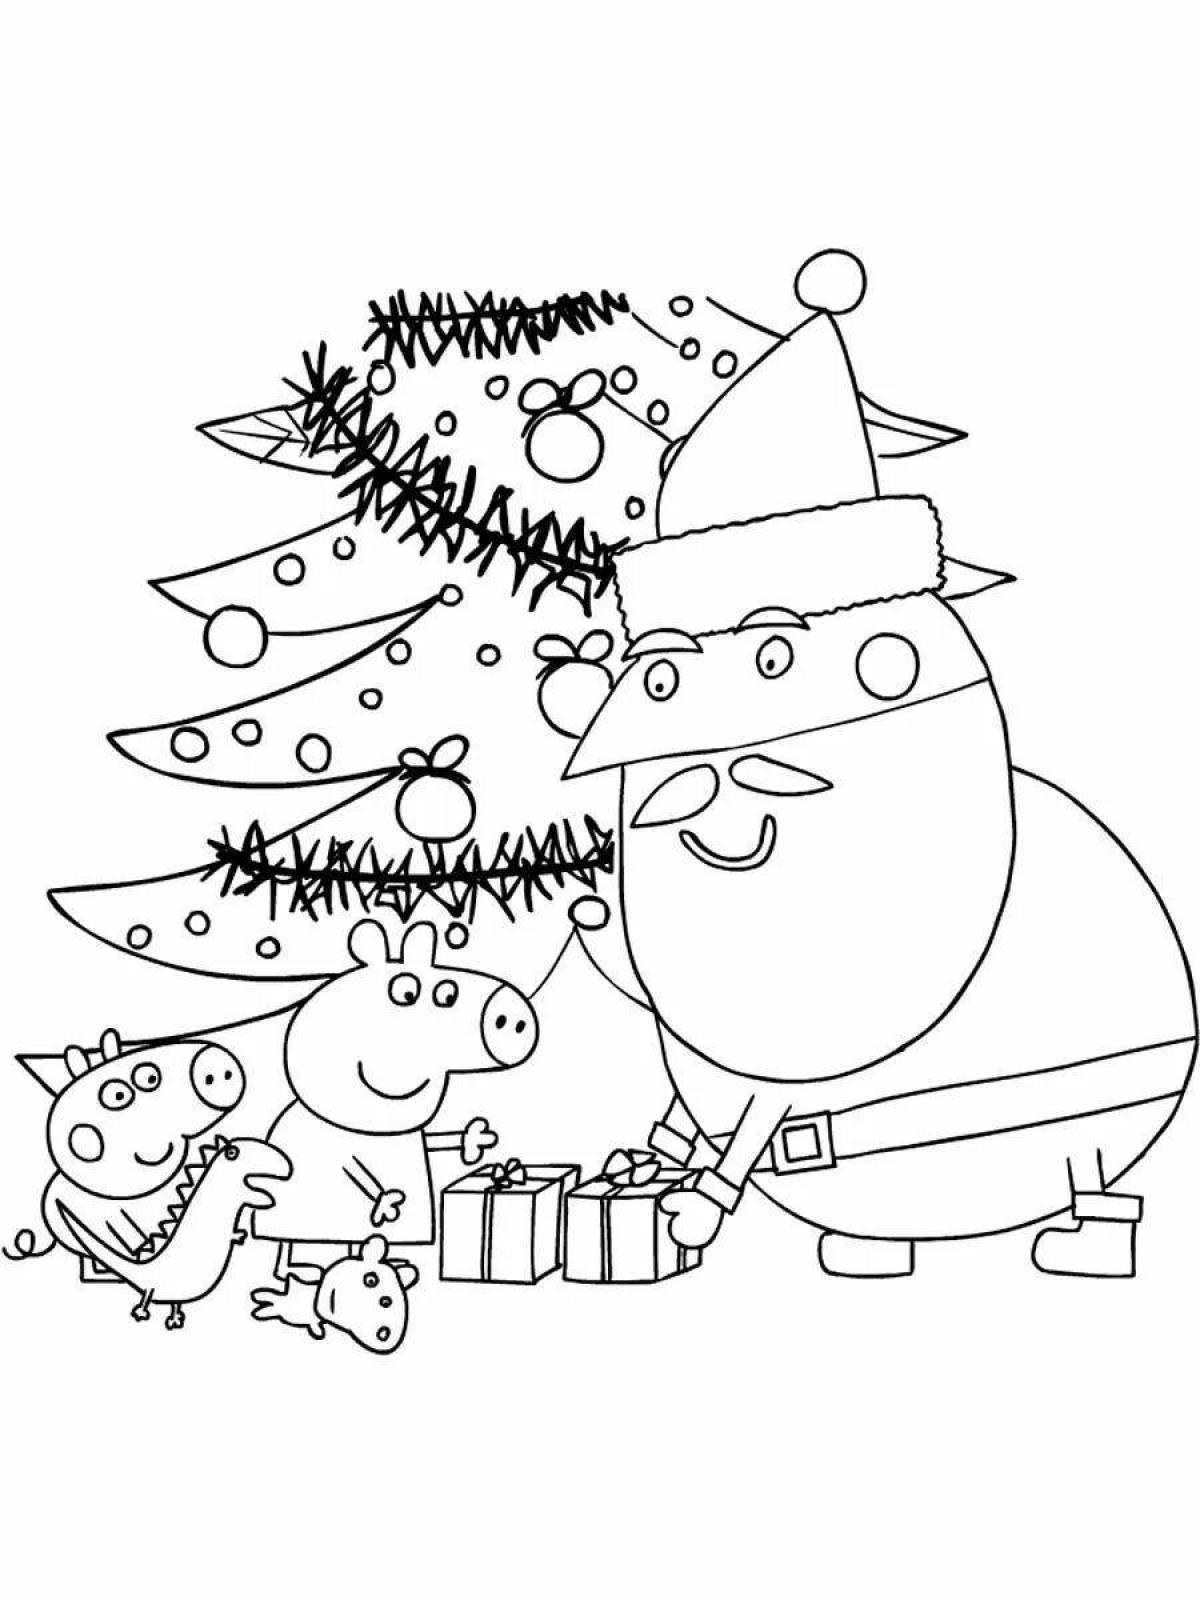 Peppa Pig's playful Christmas coloring book